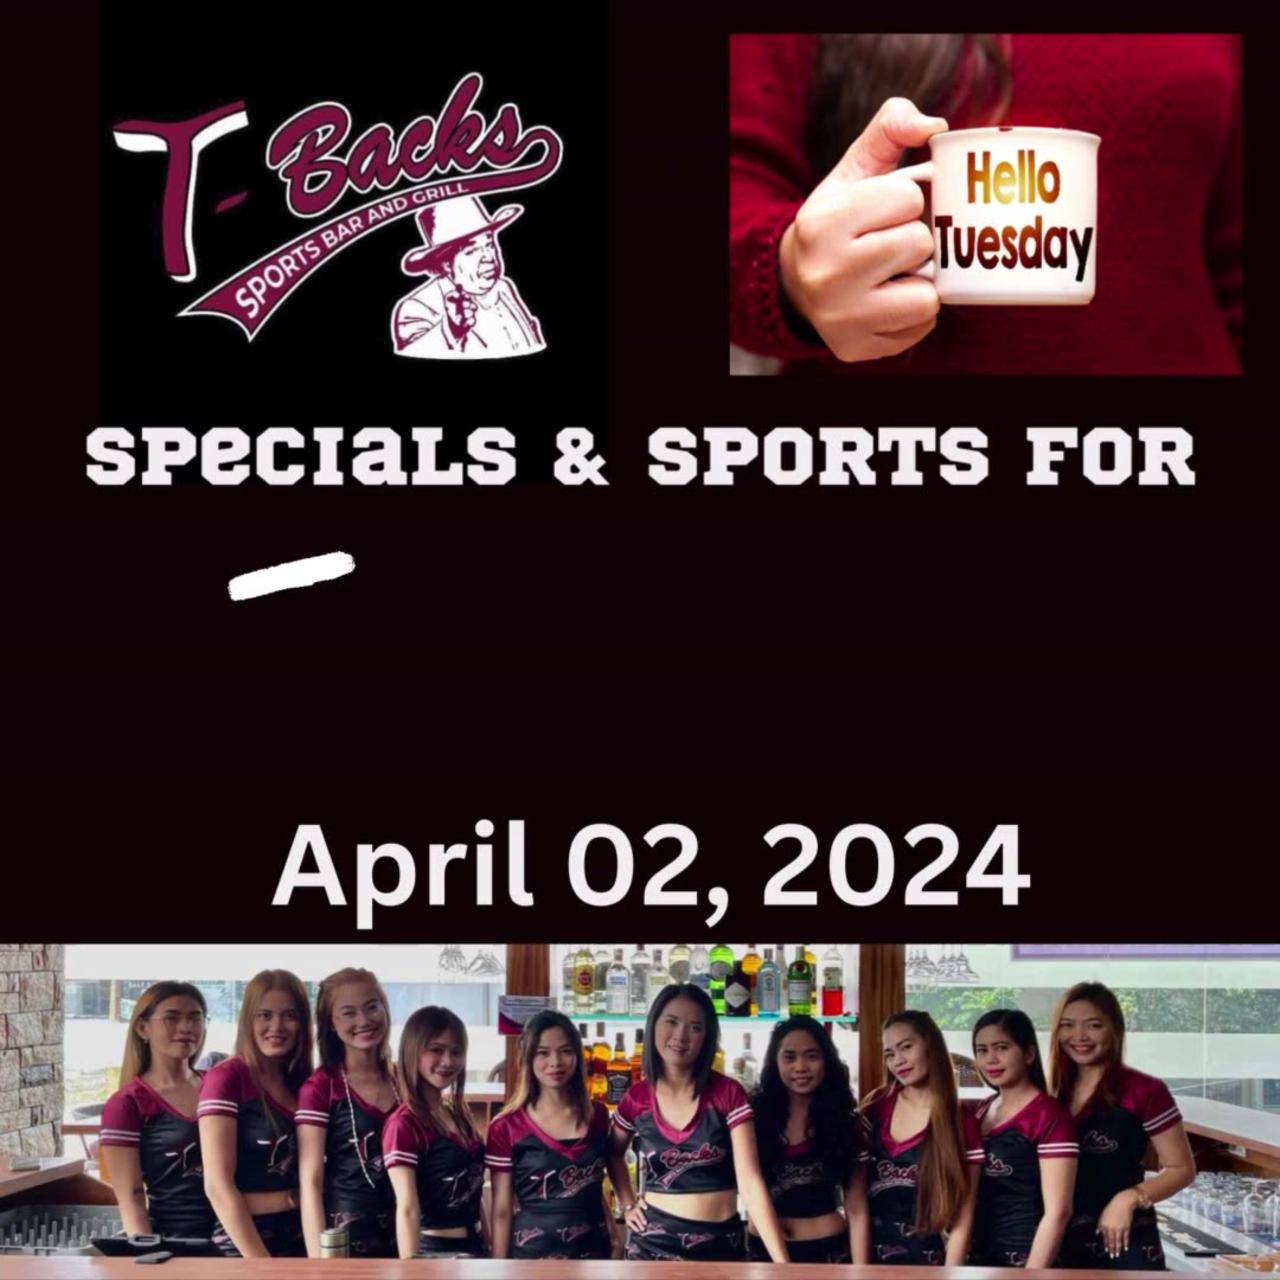 T-Backs Sports Bar and Grill Sports Schedule and free beer/soda for Tuesday April 02, 2024